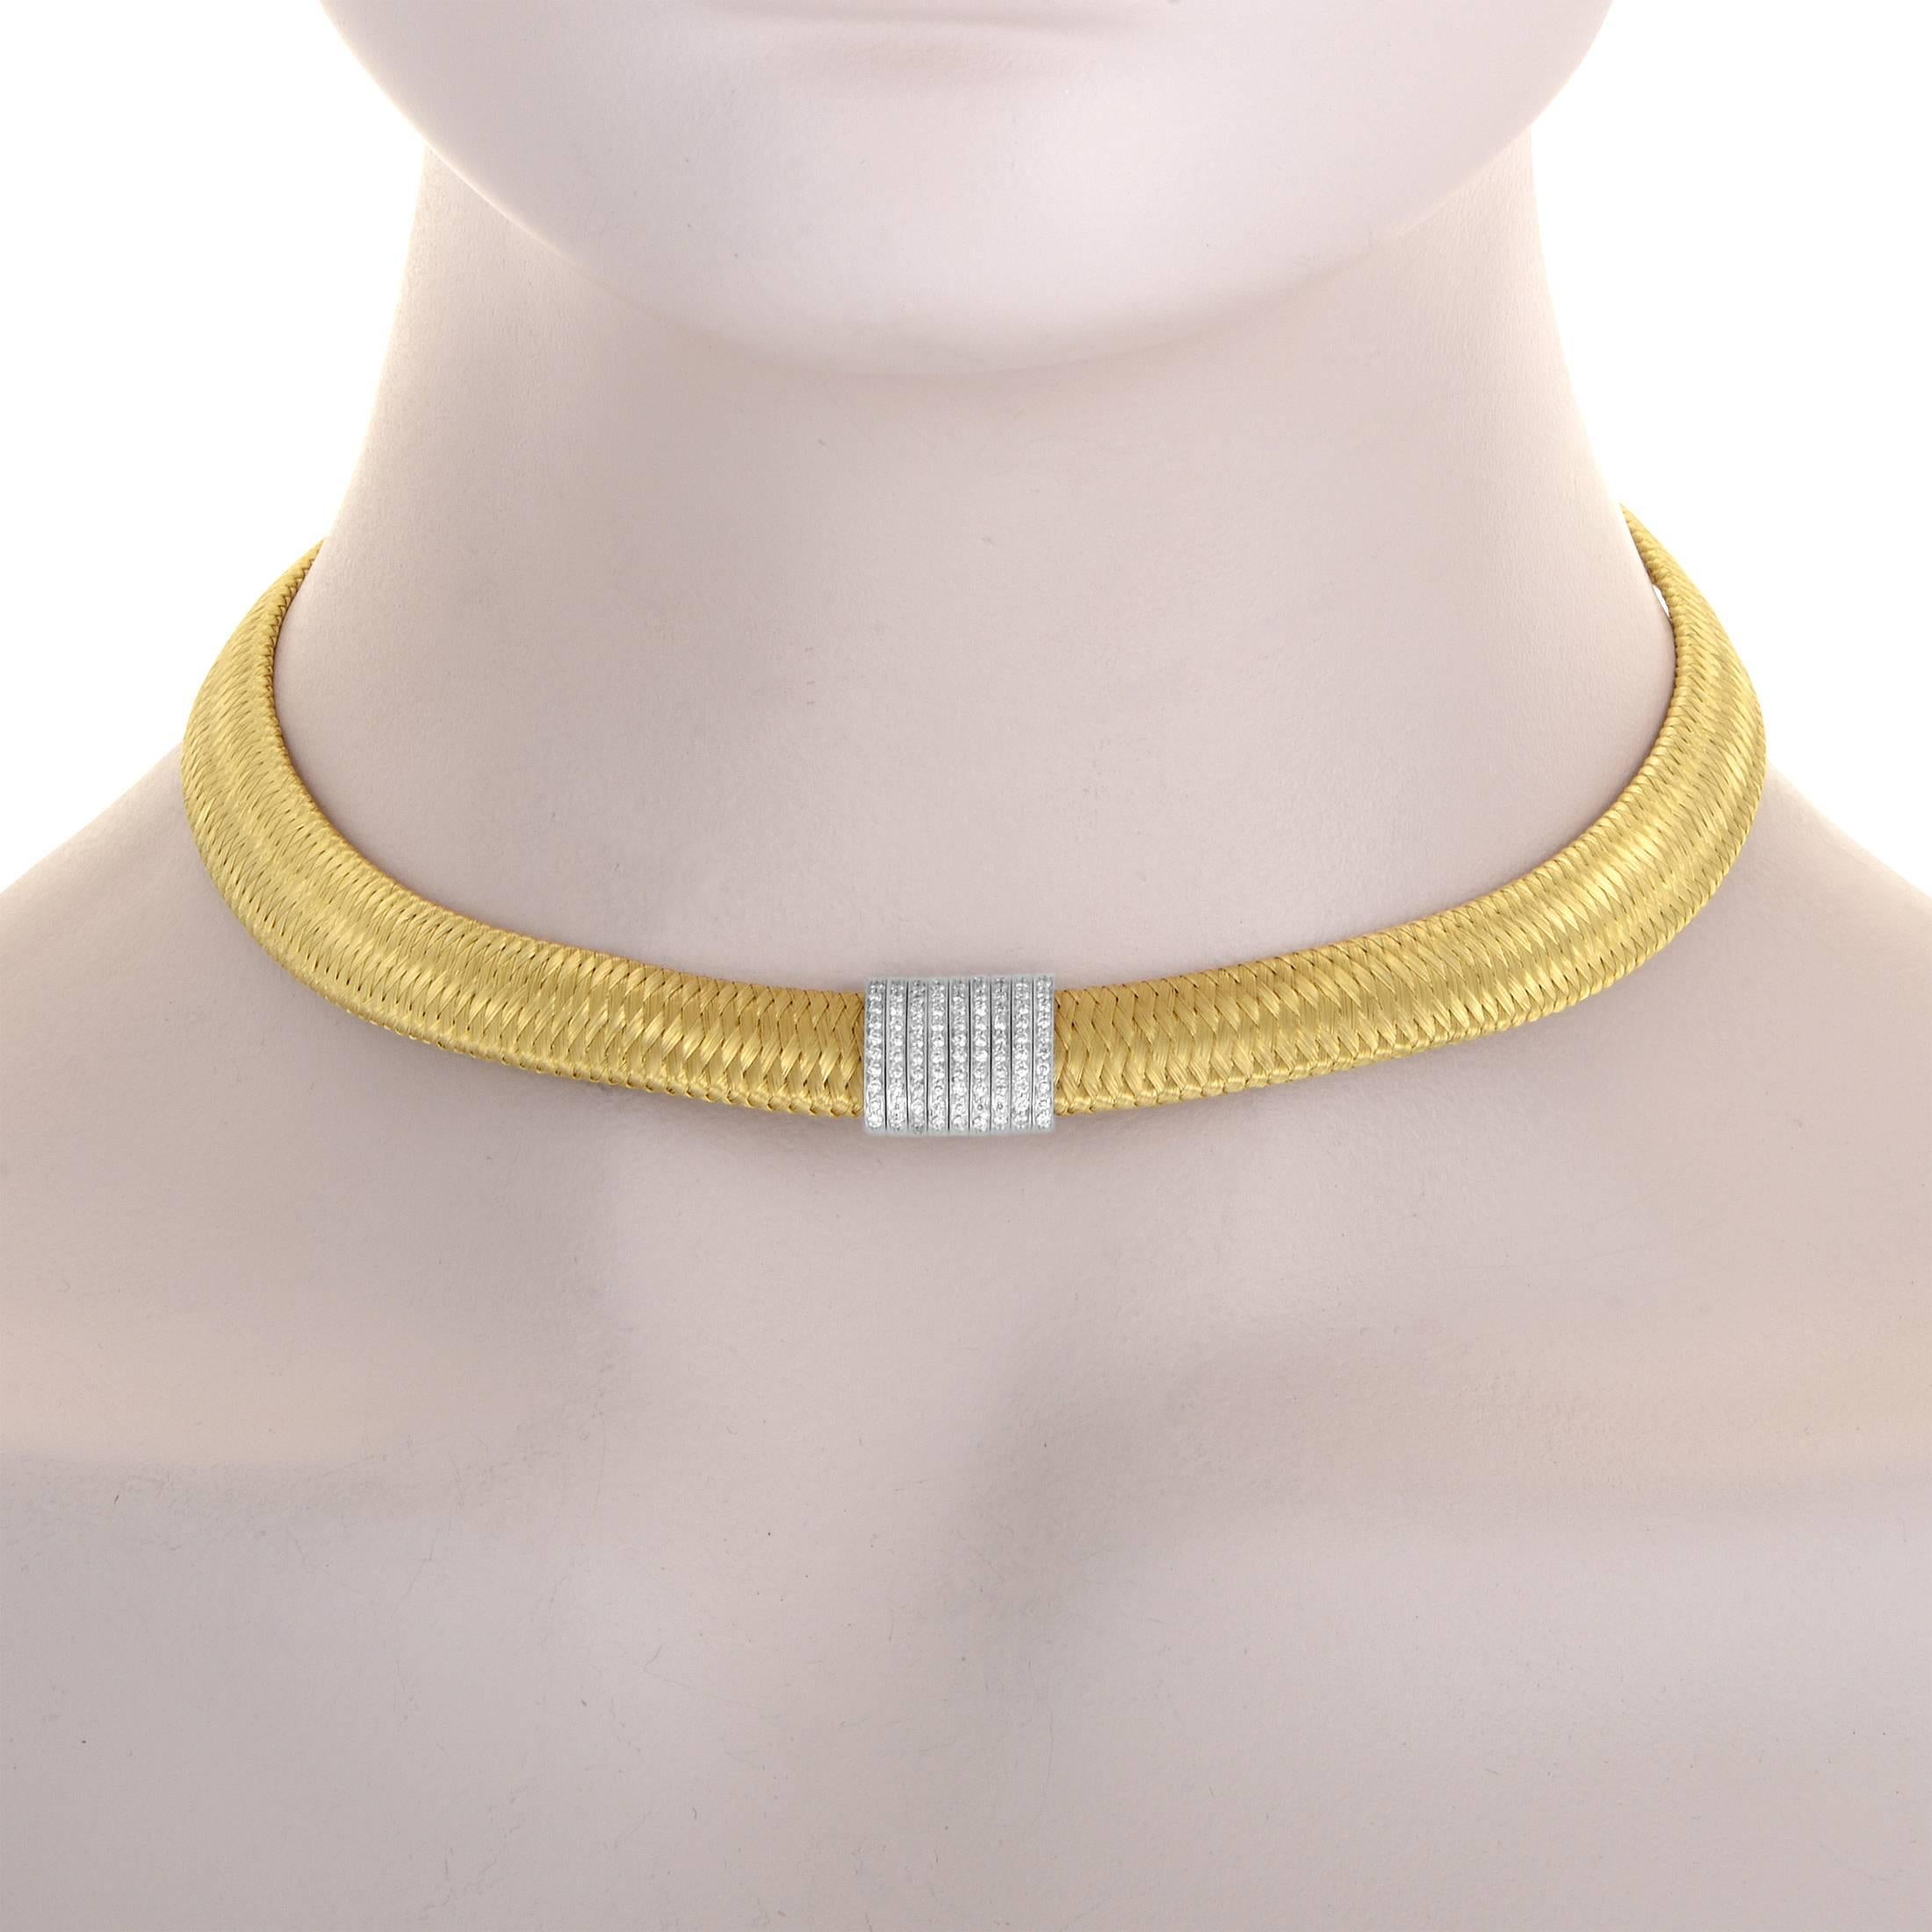 Exceptional weaved texture of prestigious 18K yellow gold is revealed upon a closer look at this glamorous necklace from Roberto Coin which is also embellished with resplendent diamonds weighing in total 0.50ct upon the complementing 18K white gold